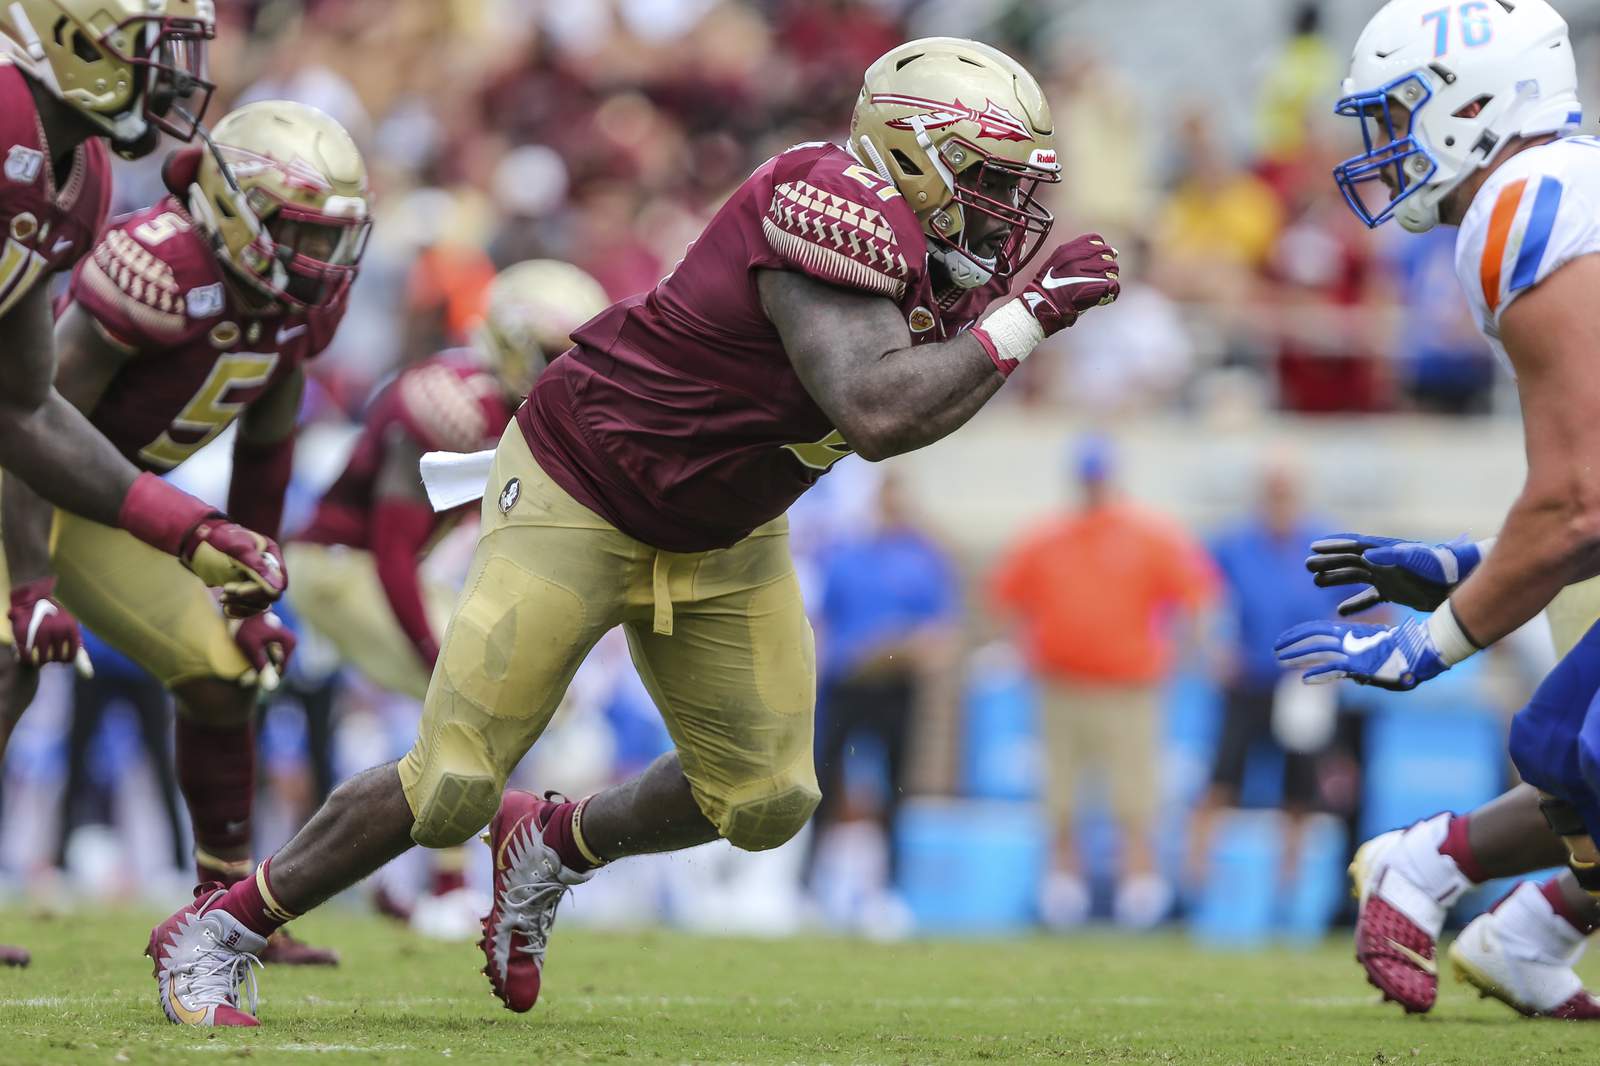 Florida State vs. UNC: How to watch, stream, listen